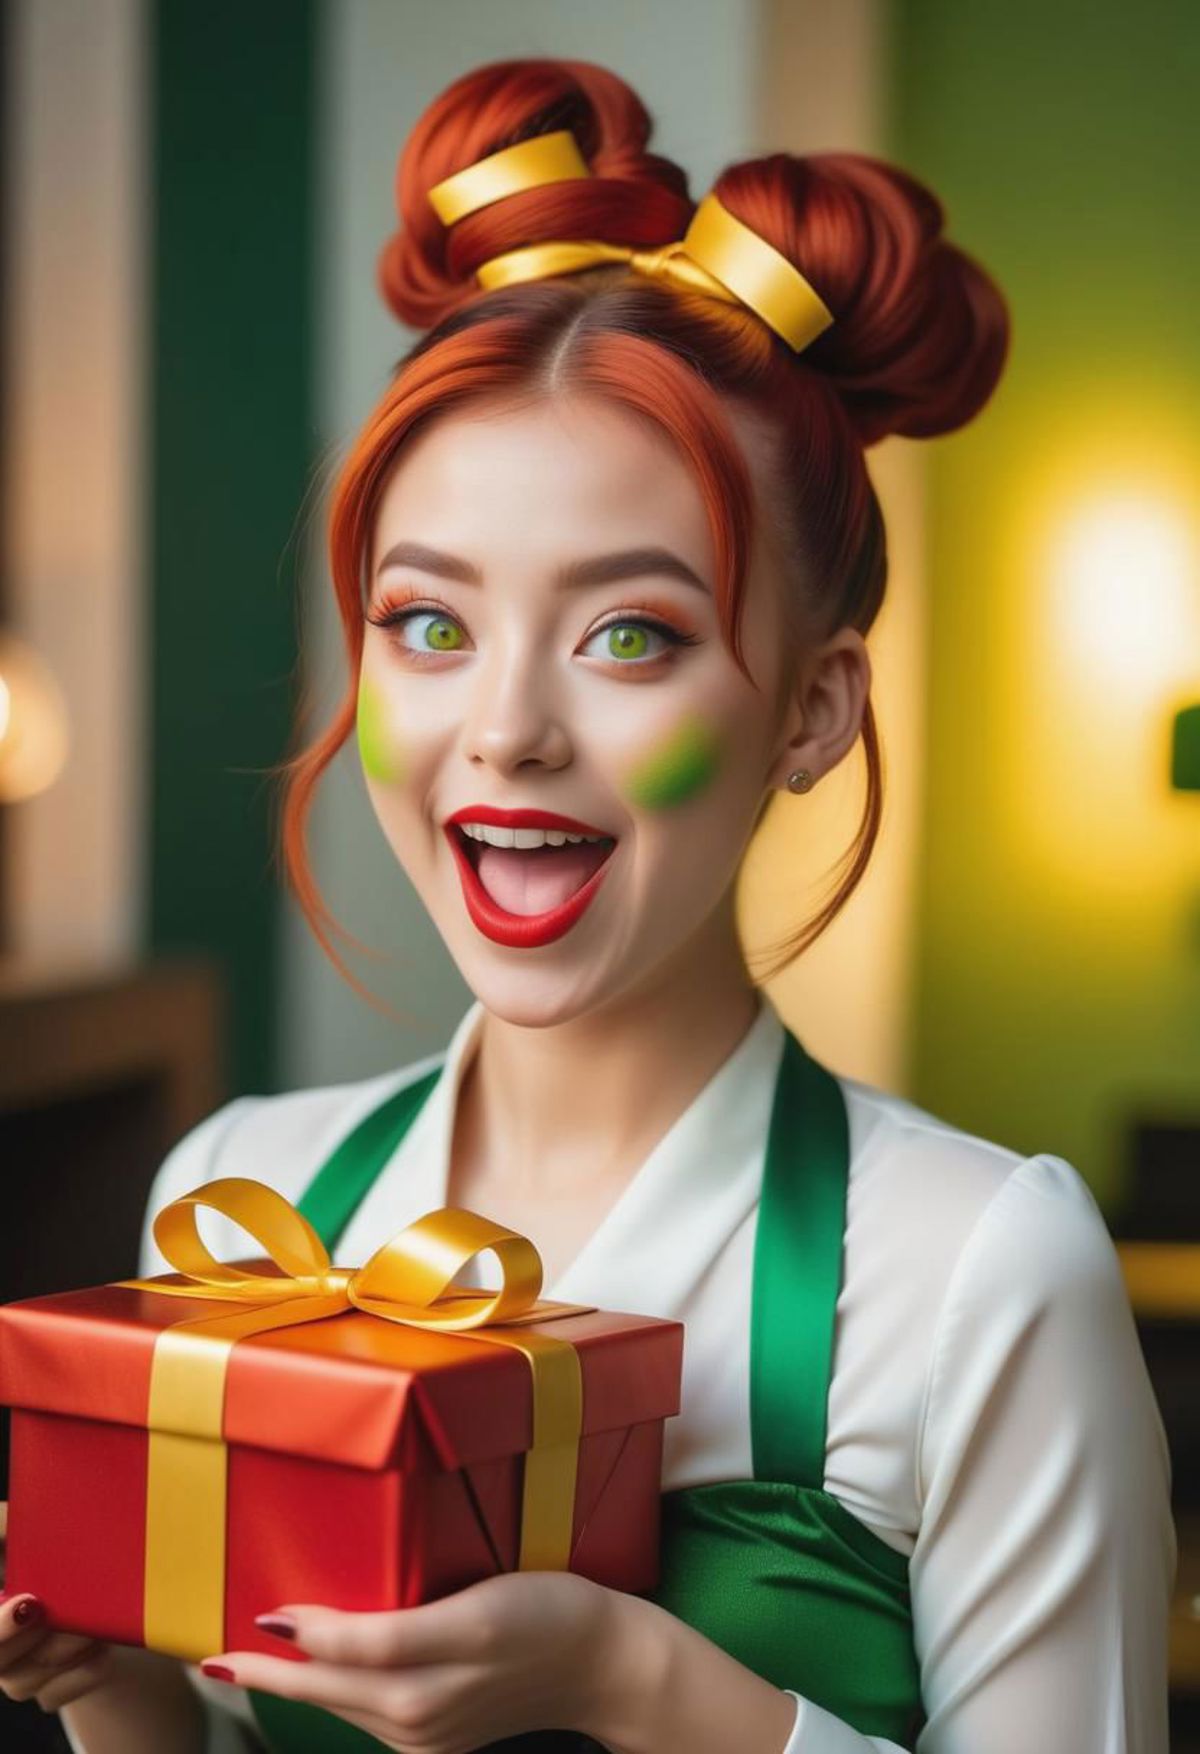 A young woman wearing green and red makeup, holding a Christmas gift.